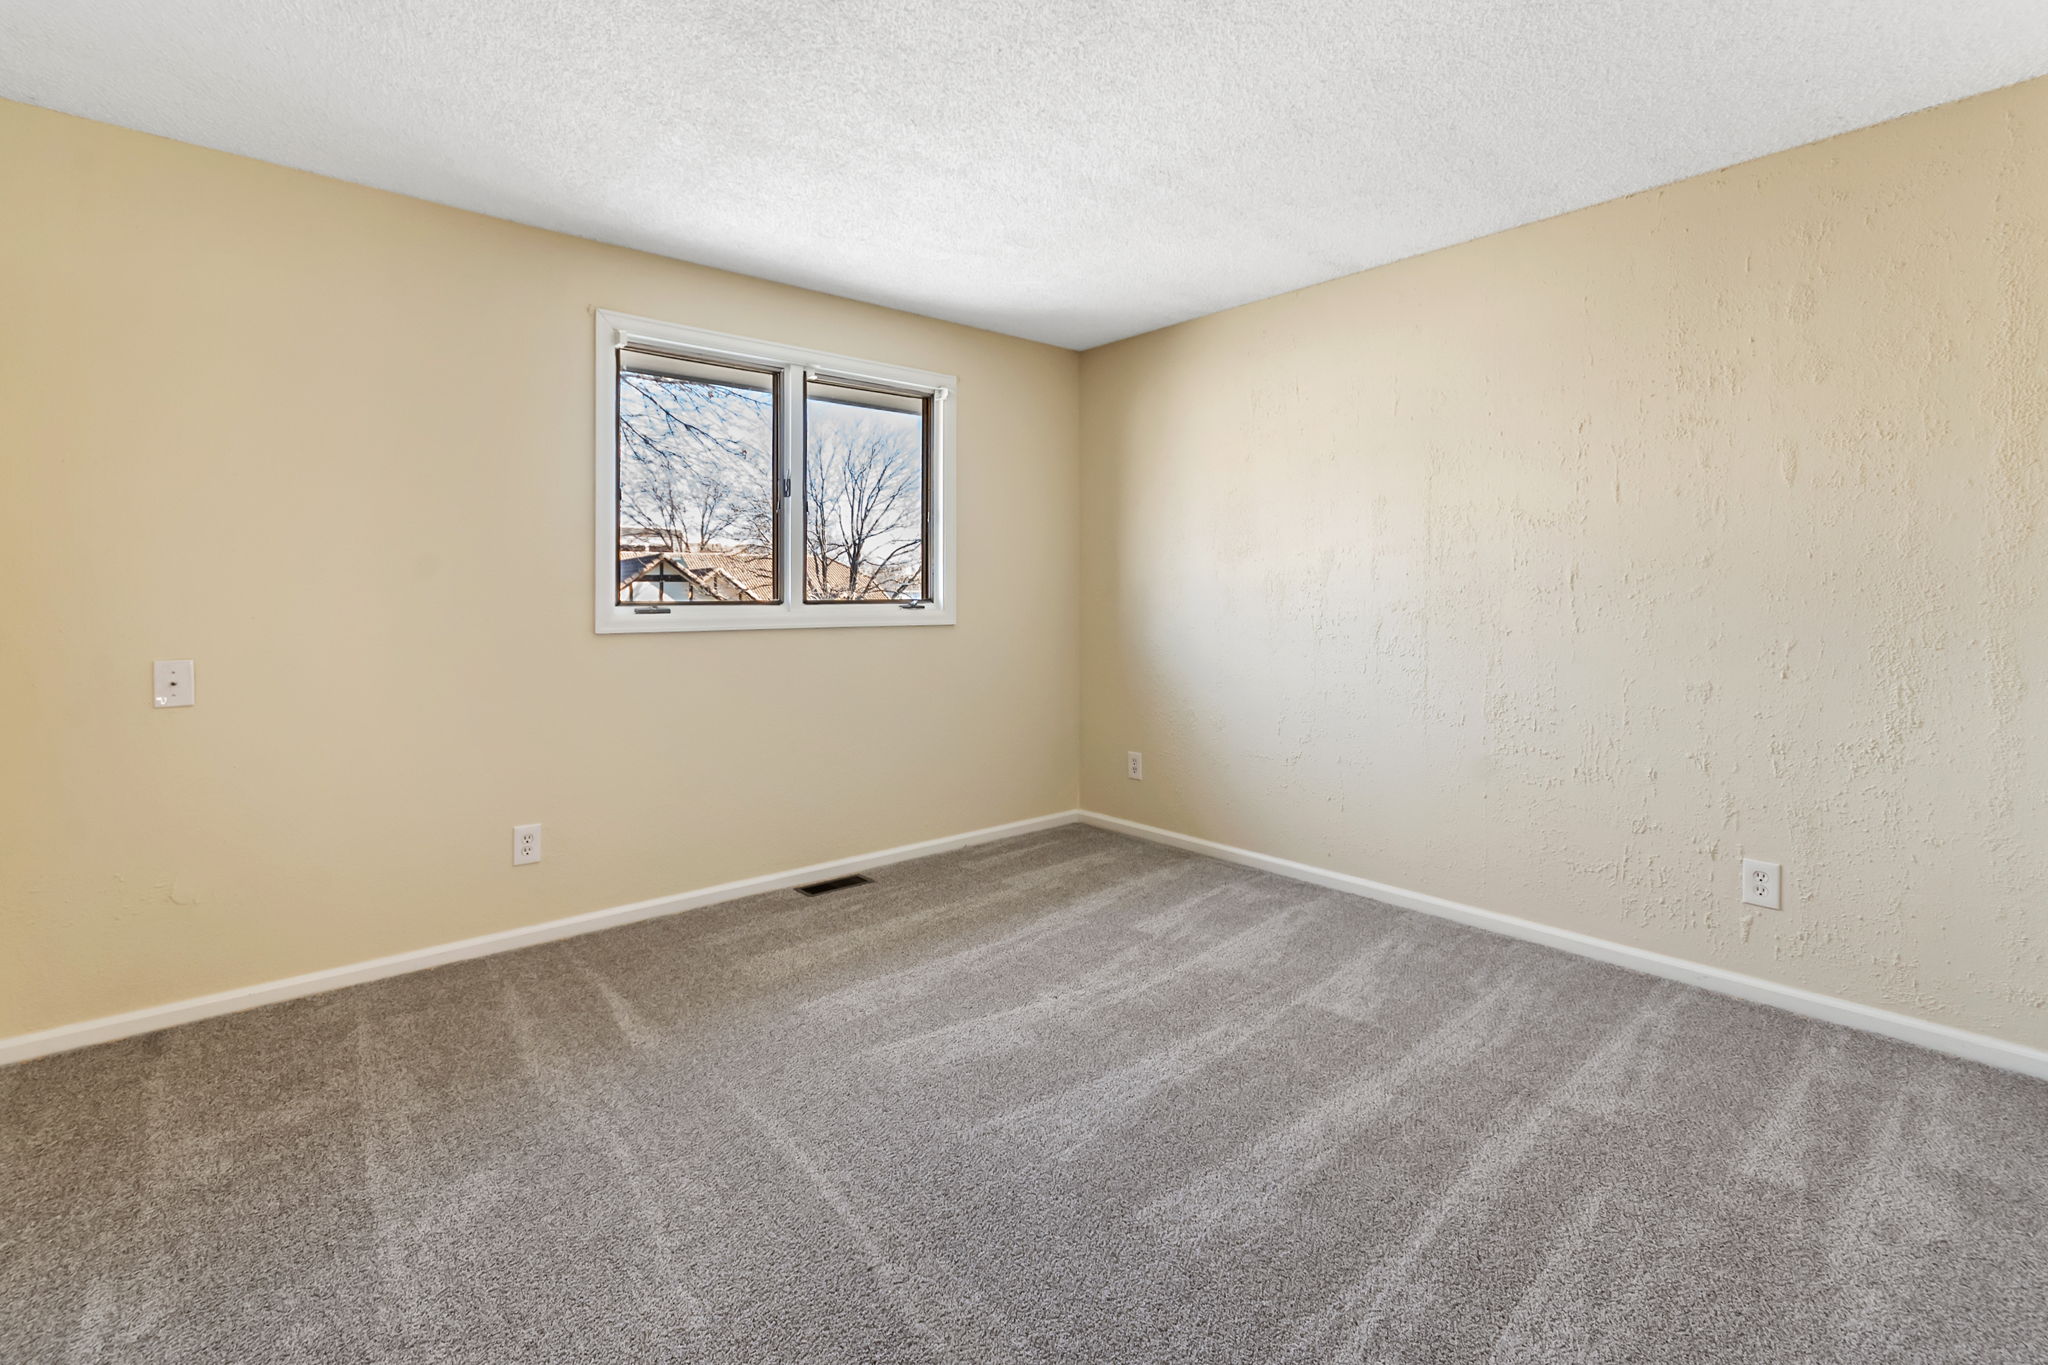  1678 W 115th Cir, Westminster, CO 80234, US Photo 30